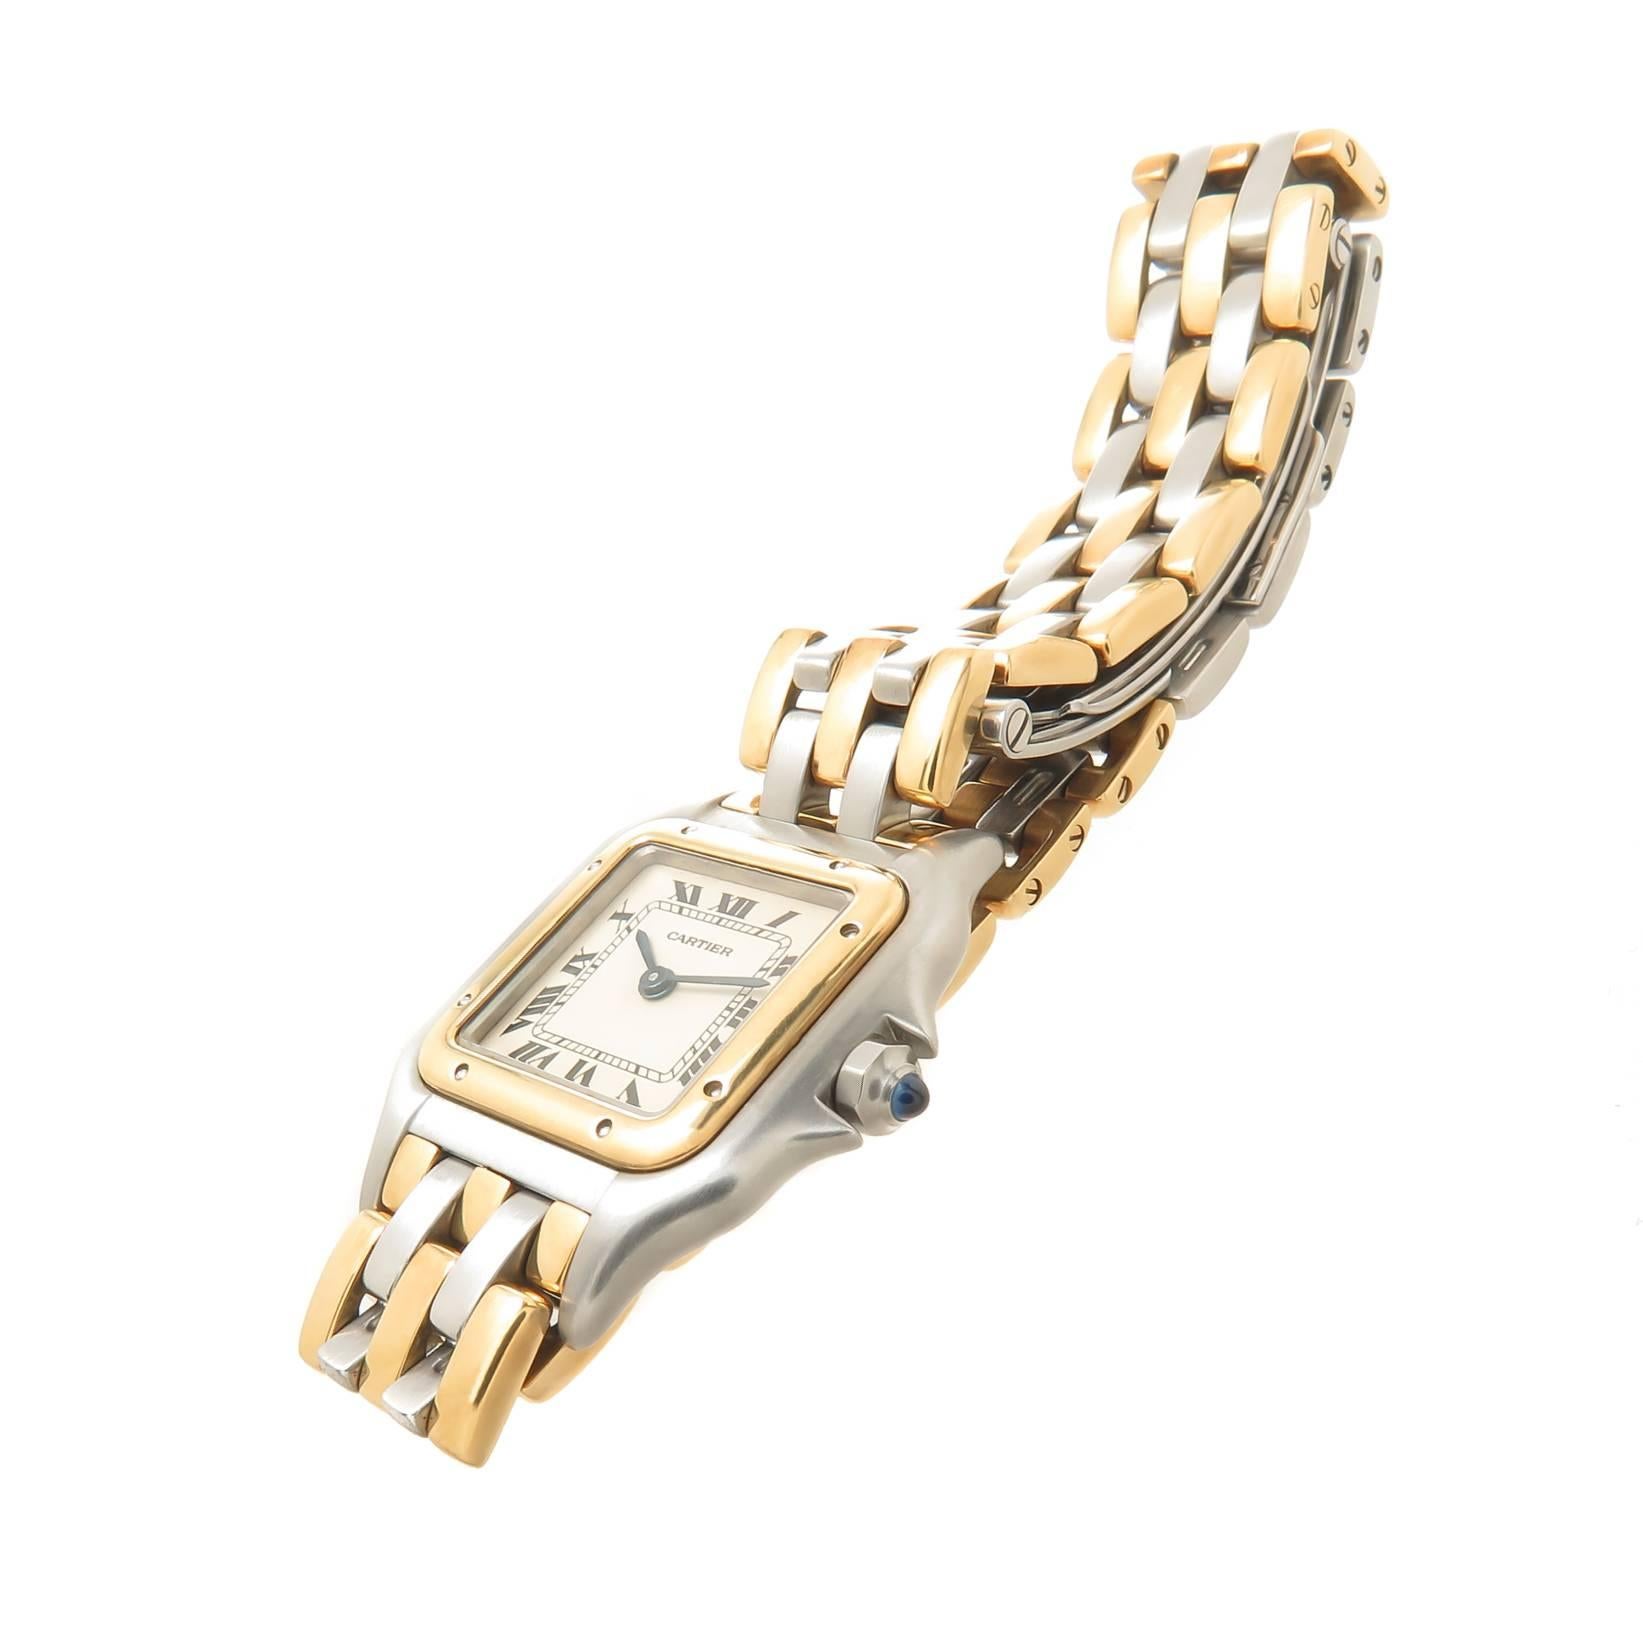 Circa 1990s Cartier Ladies Panther Collection Ladies Wrist Watch, 30 X 23 MM Stainless Steel Water resistant Case with 18K Yellow Gold Bezel, Quartz Movement, White Dial with Black Roman Numerals and a sapphire Crown. 1/2 inch wide " 3 stripe